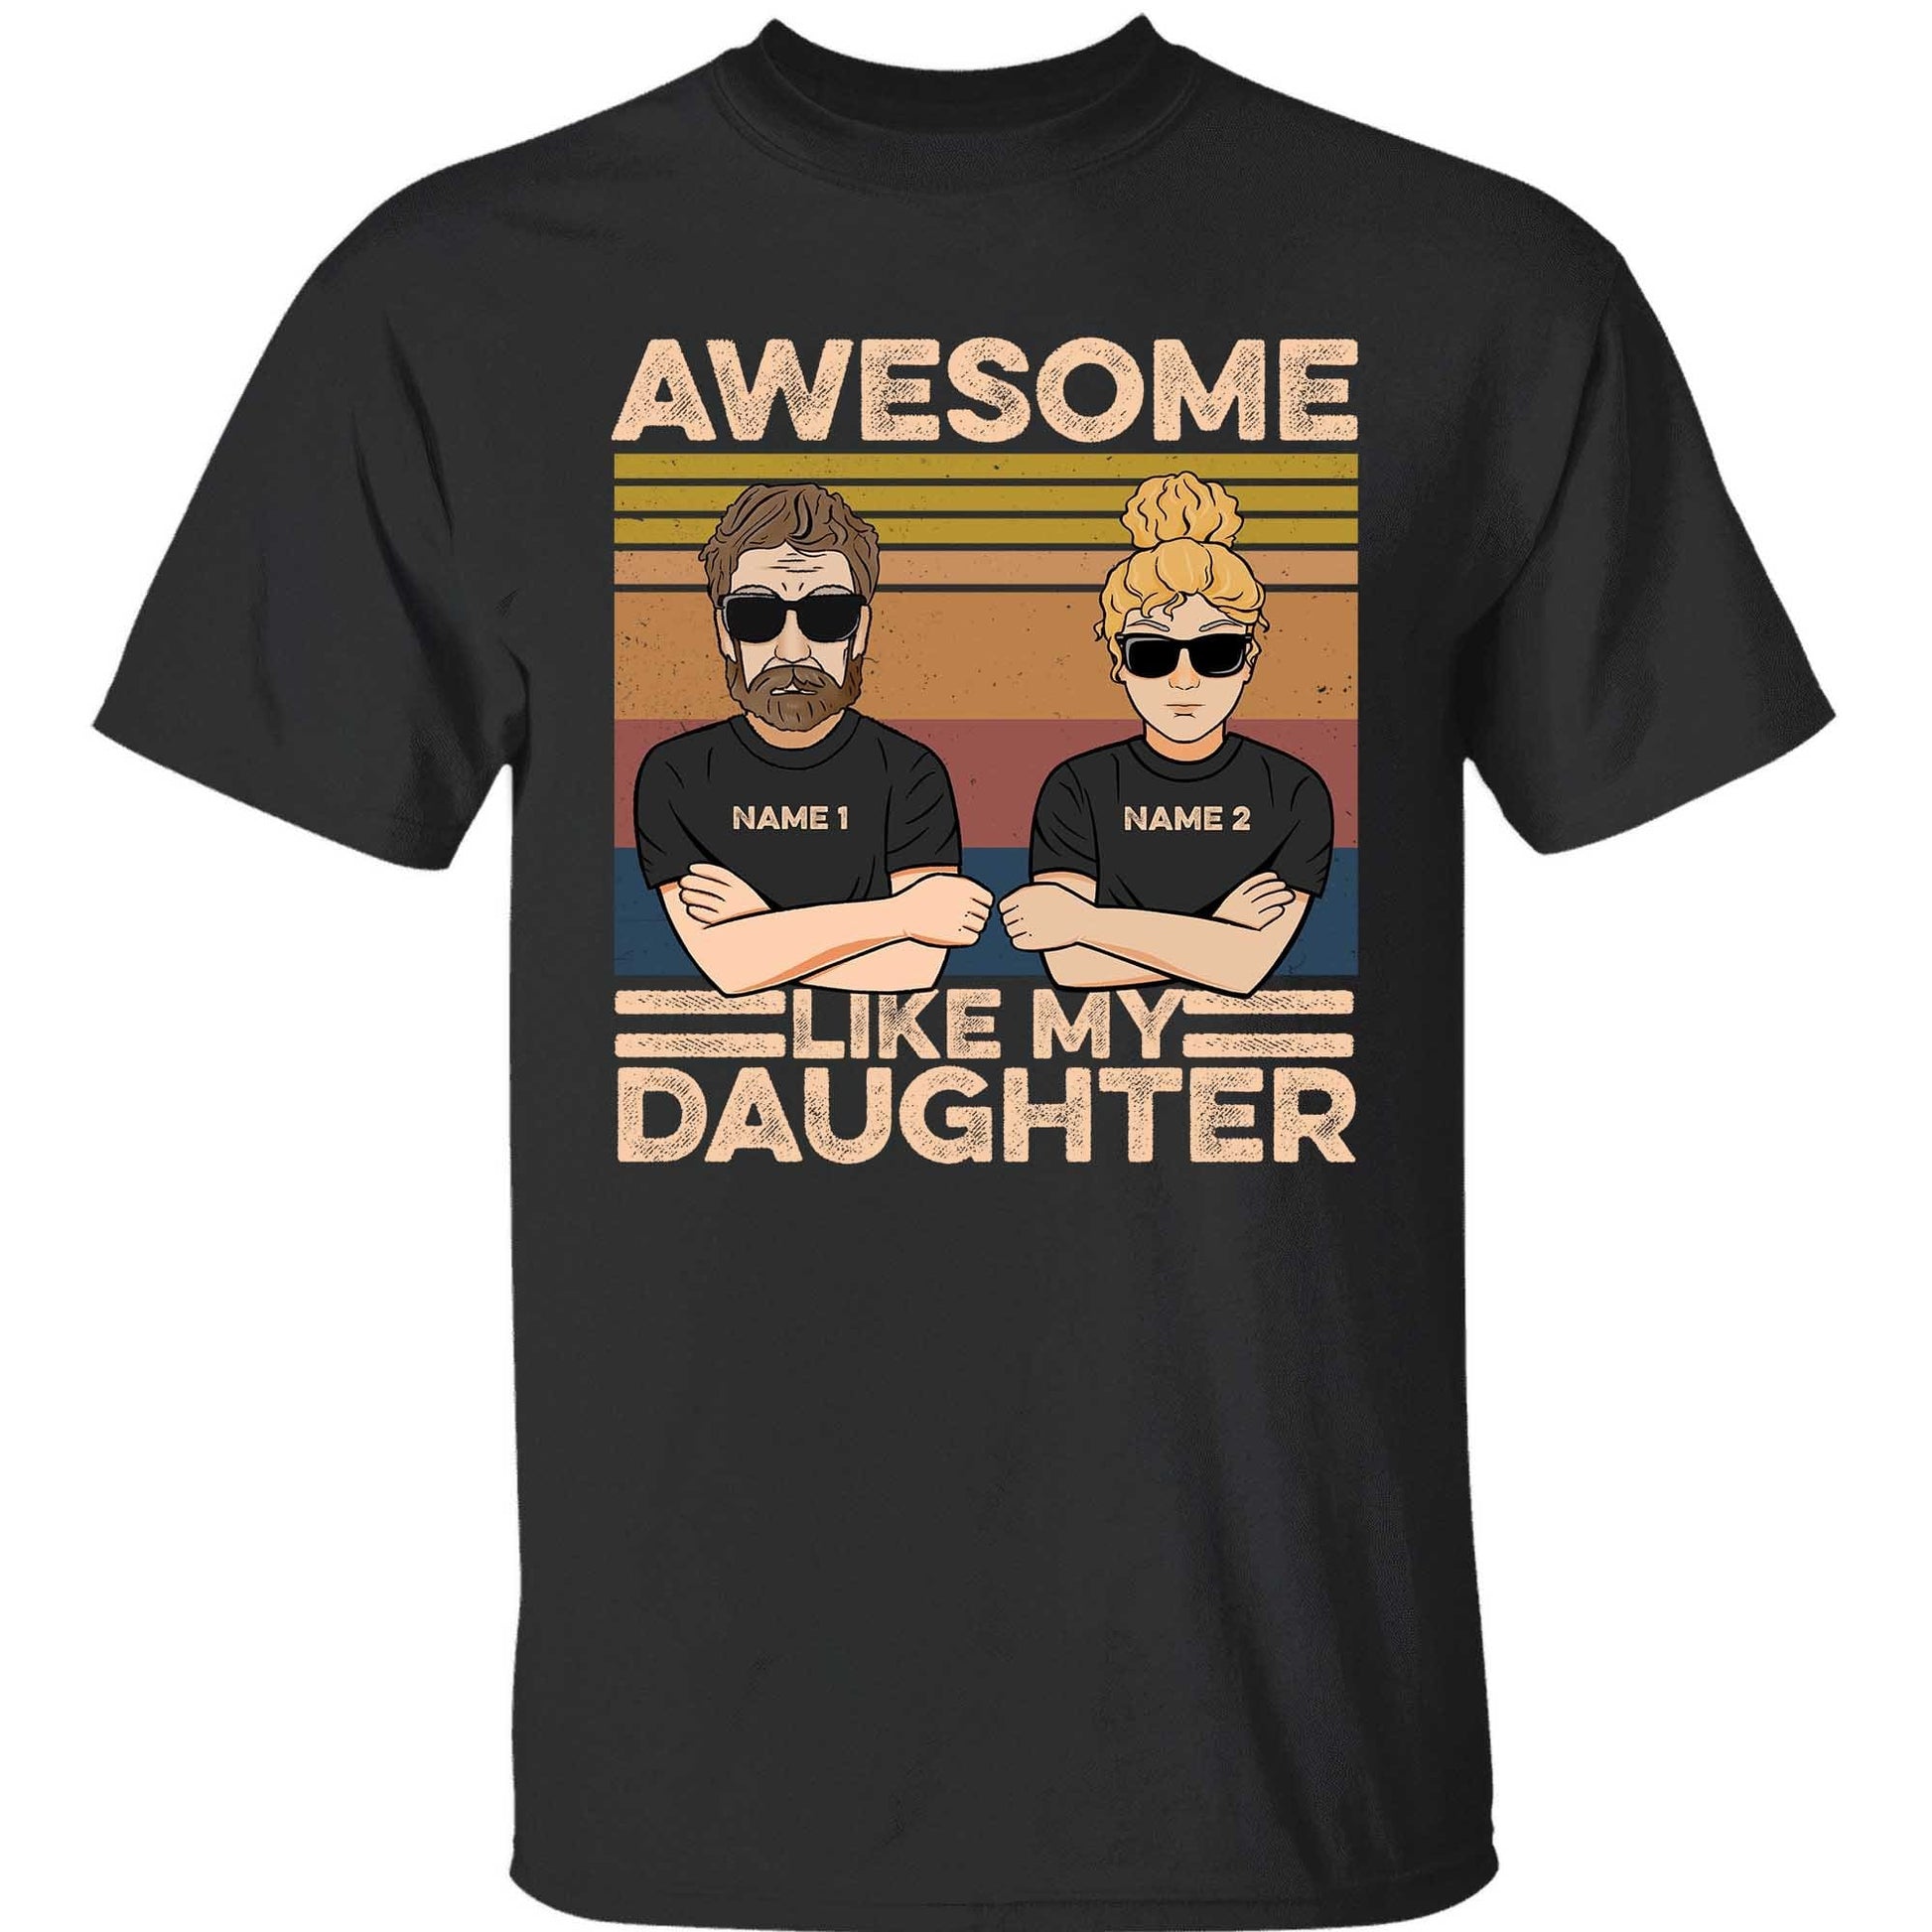 Awesome Like My Daughter, Father Custom shirt, Gift For Your Dad-Macorner